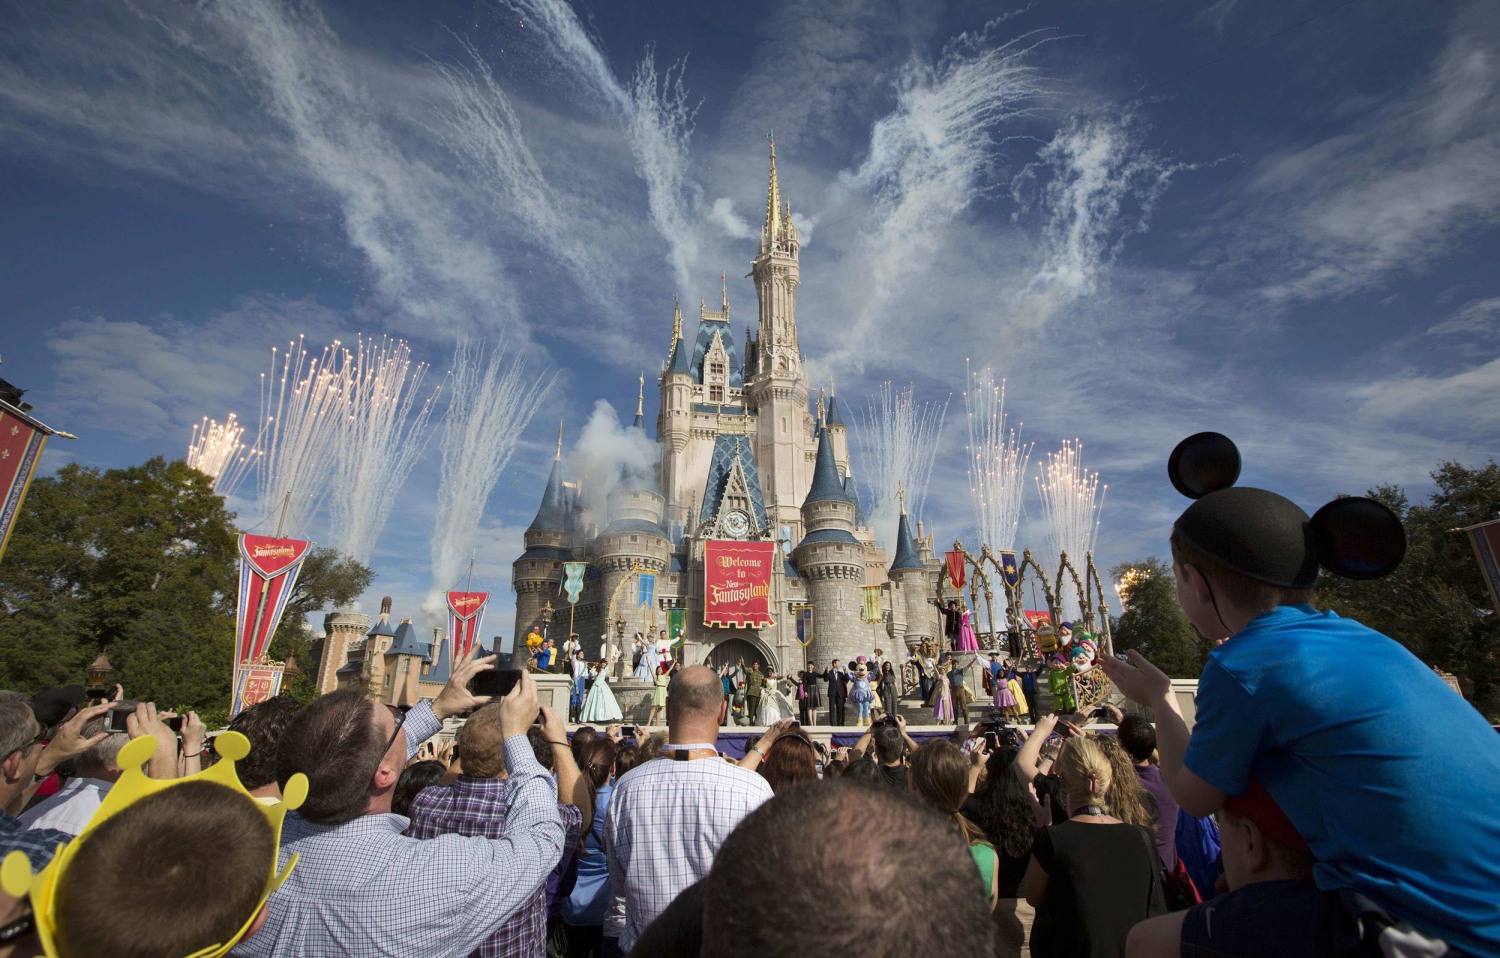 Guests Look on as Flames Shoot From Disney Castle